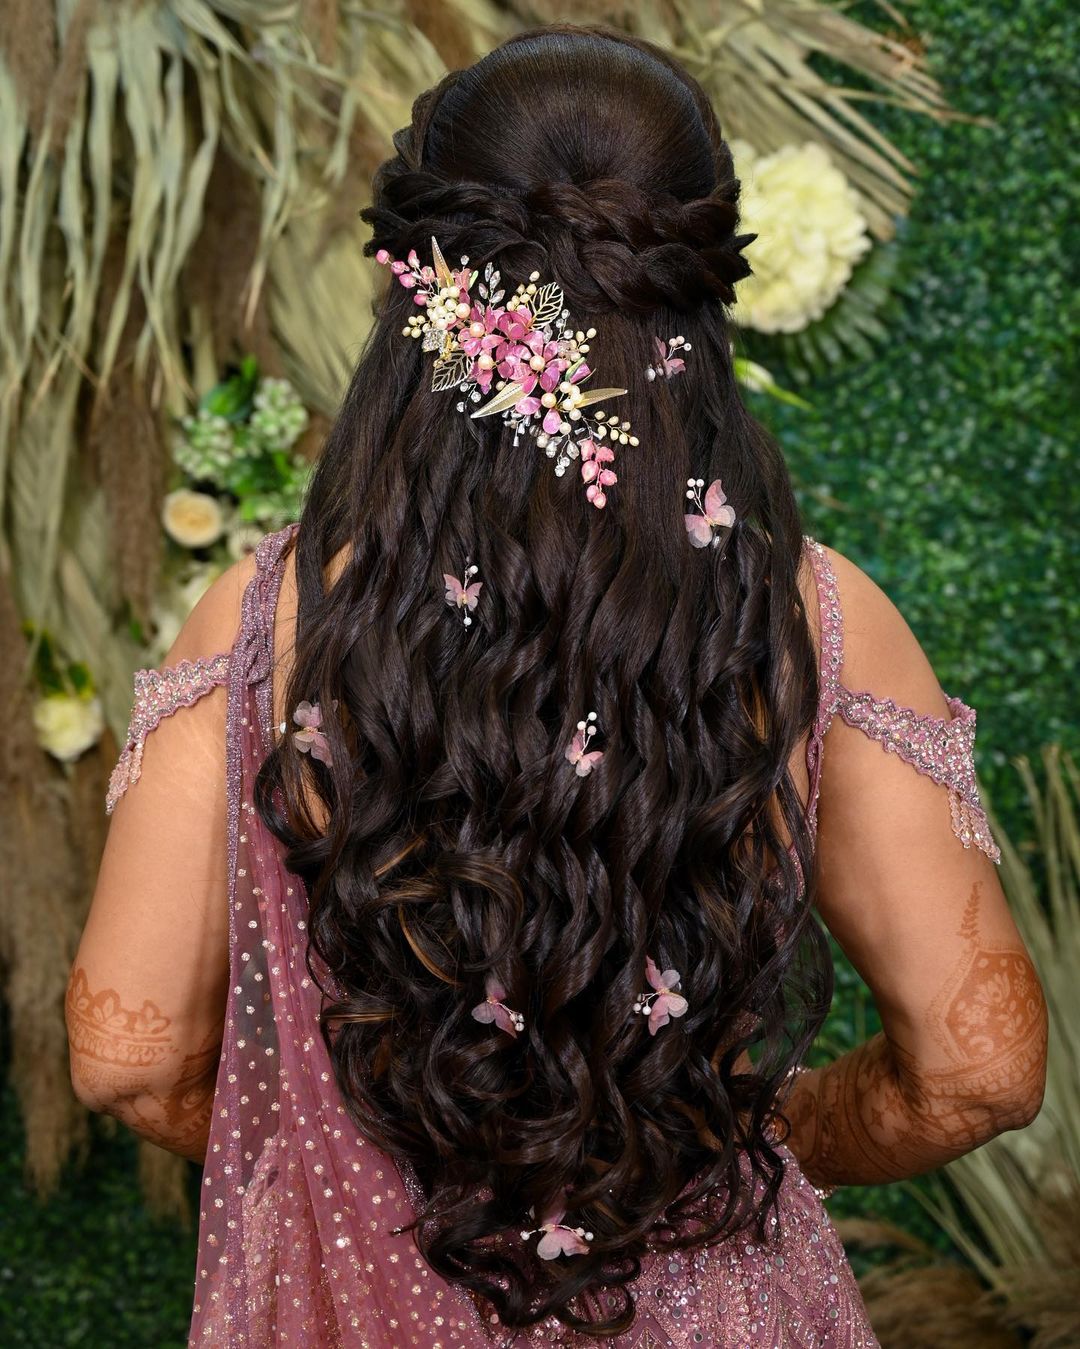 12 Wedding Hairstyles To Match Your Dress' Neckline | TheBeauLife